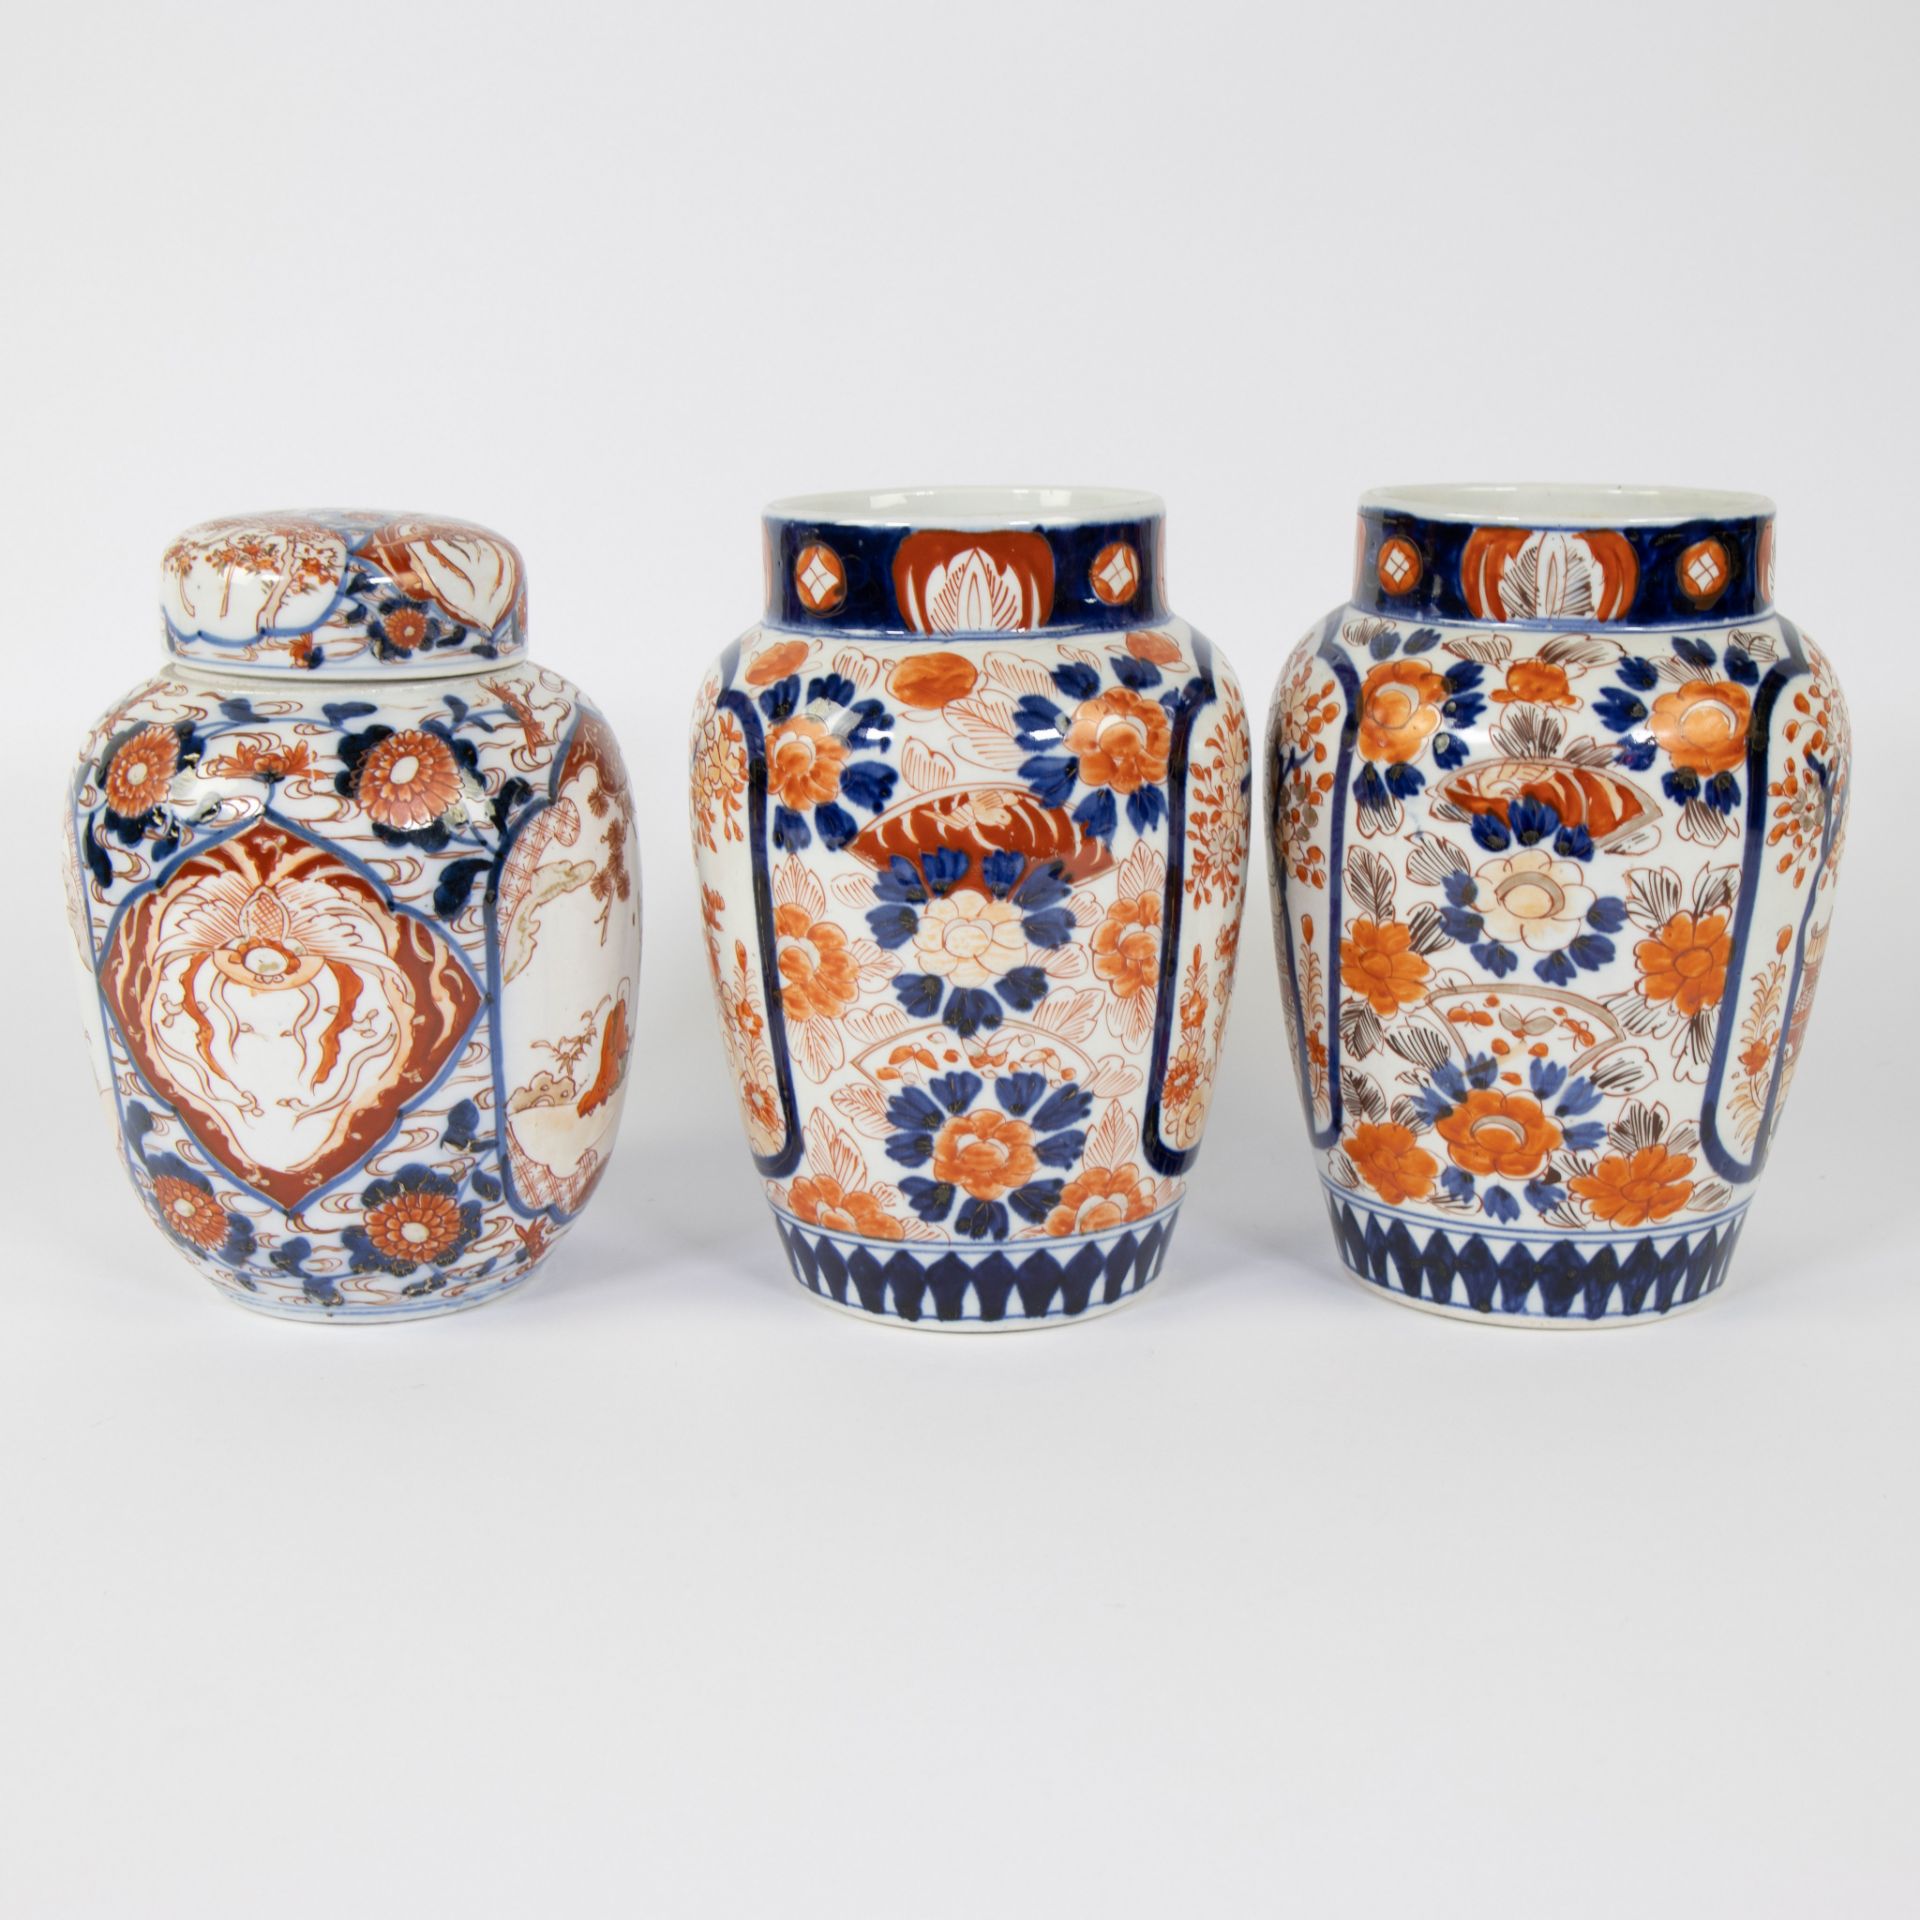 Pair of Japanese Imari lidded vases and one convex lidded vase, 19th century - Image 2 of 6